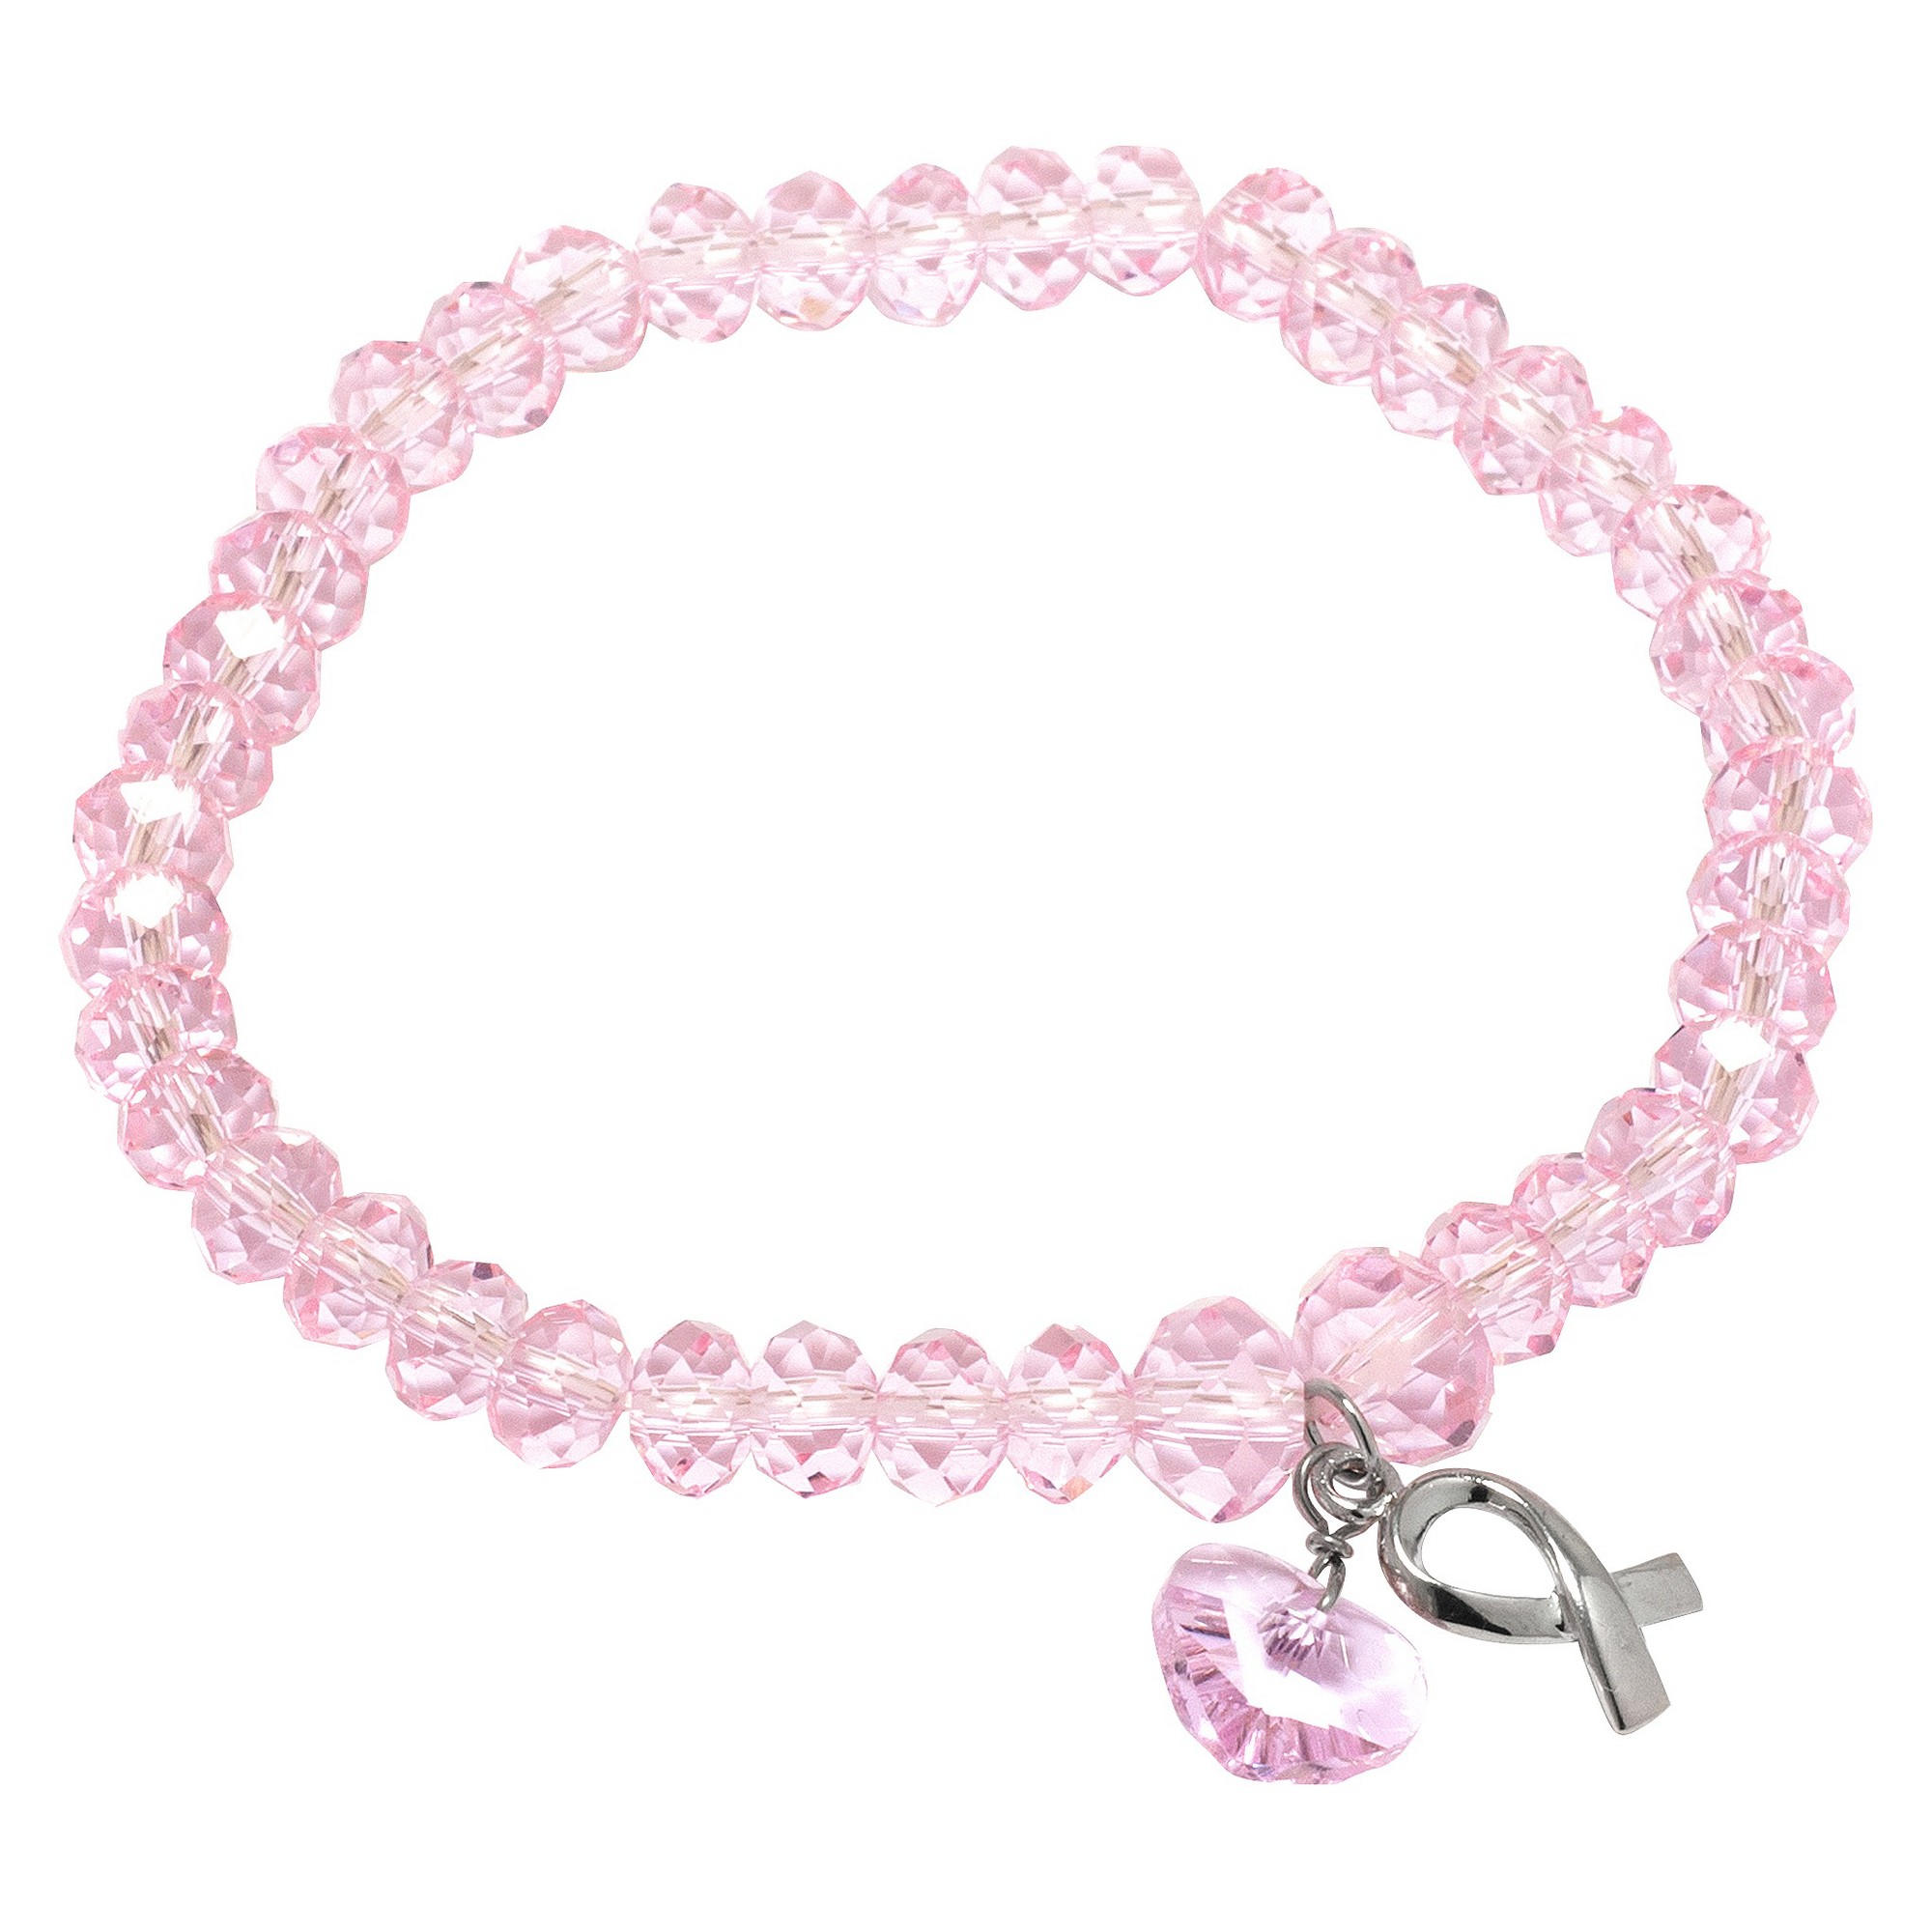 Sterling Silver Cancer Awareness Tag Stretch Pink Crystal Bracelet -Silver/Pink, Size: Small, Pink/Silver